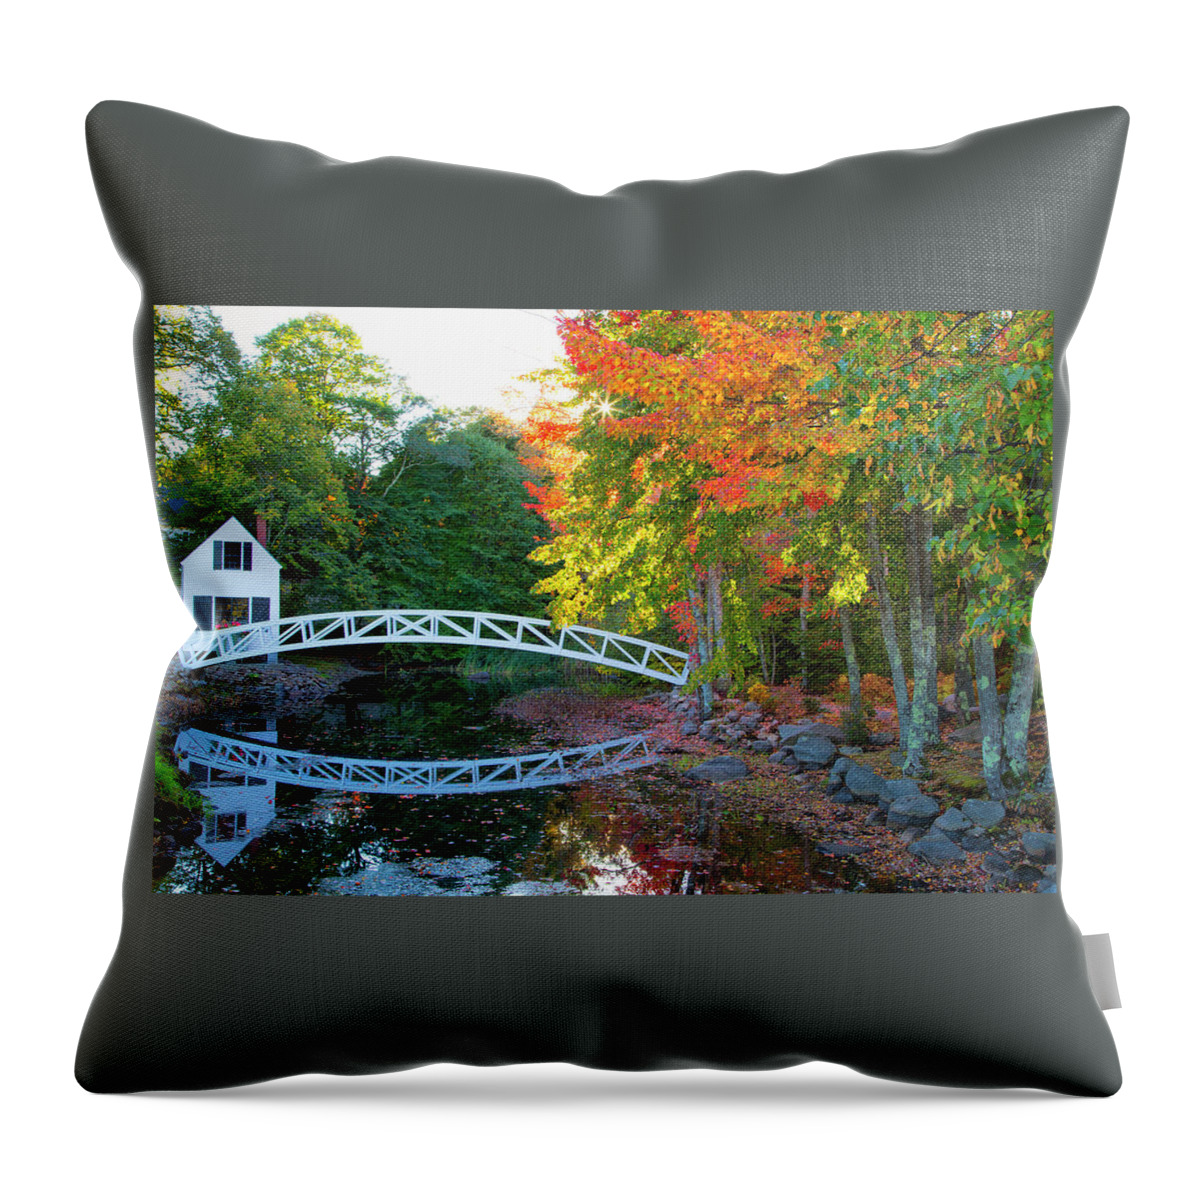 Reflection Throw Pillow featuring the photograph Pond Bridge Reflection by Nancy Dunivin